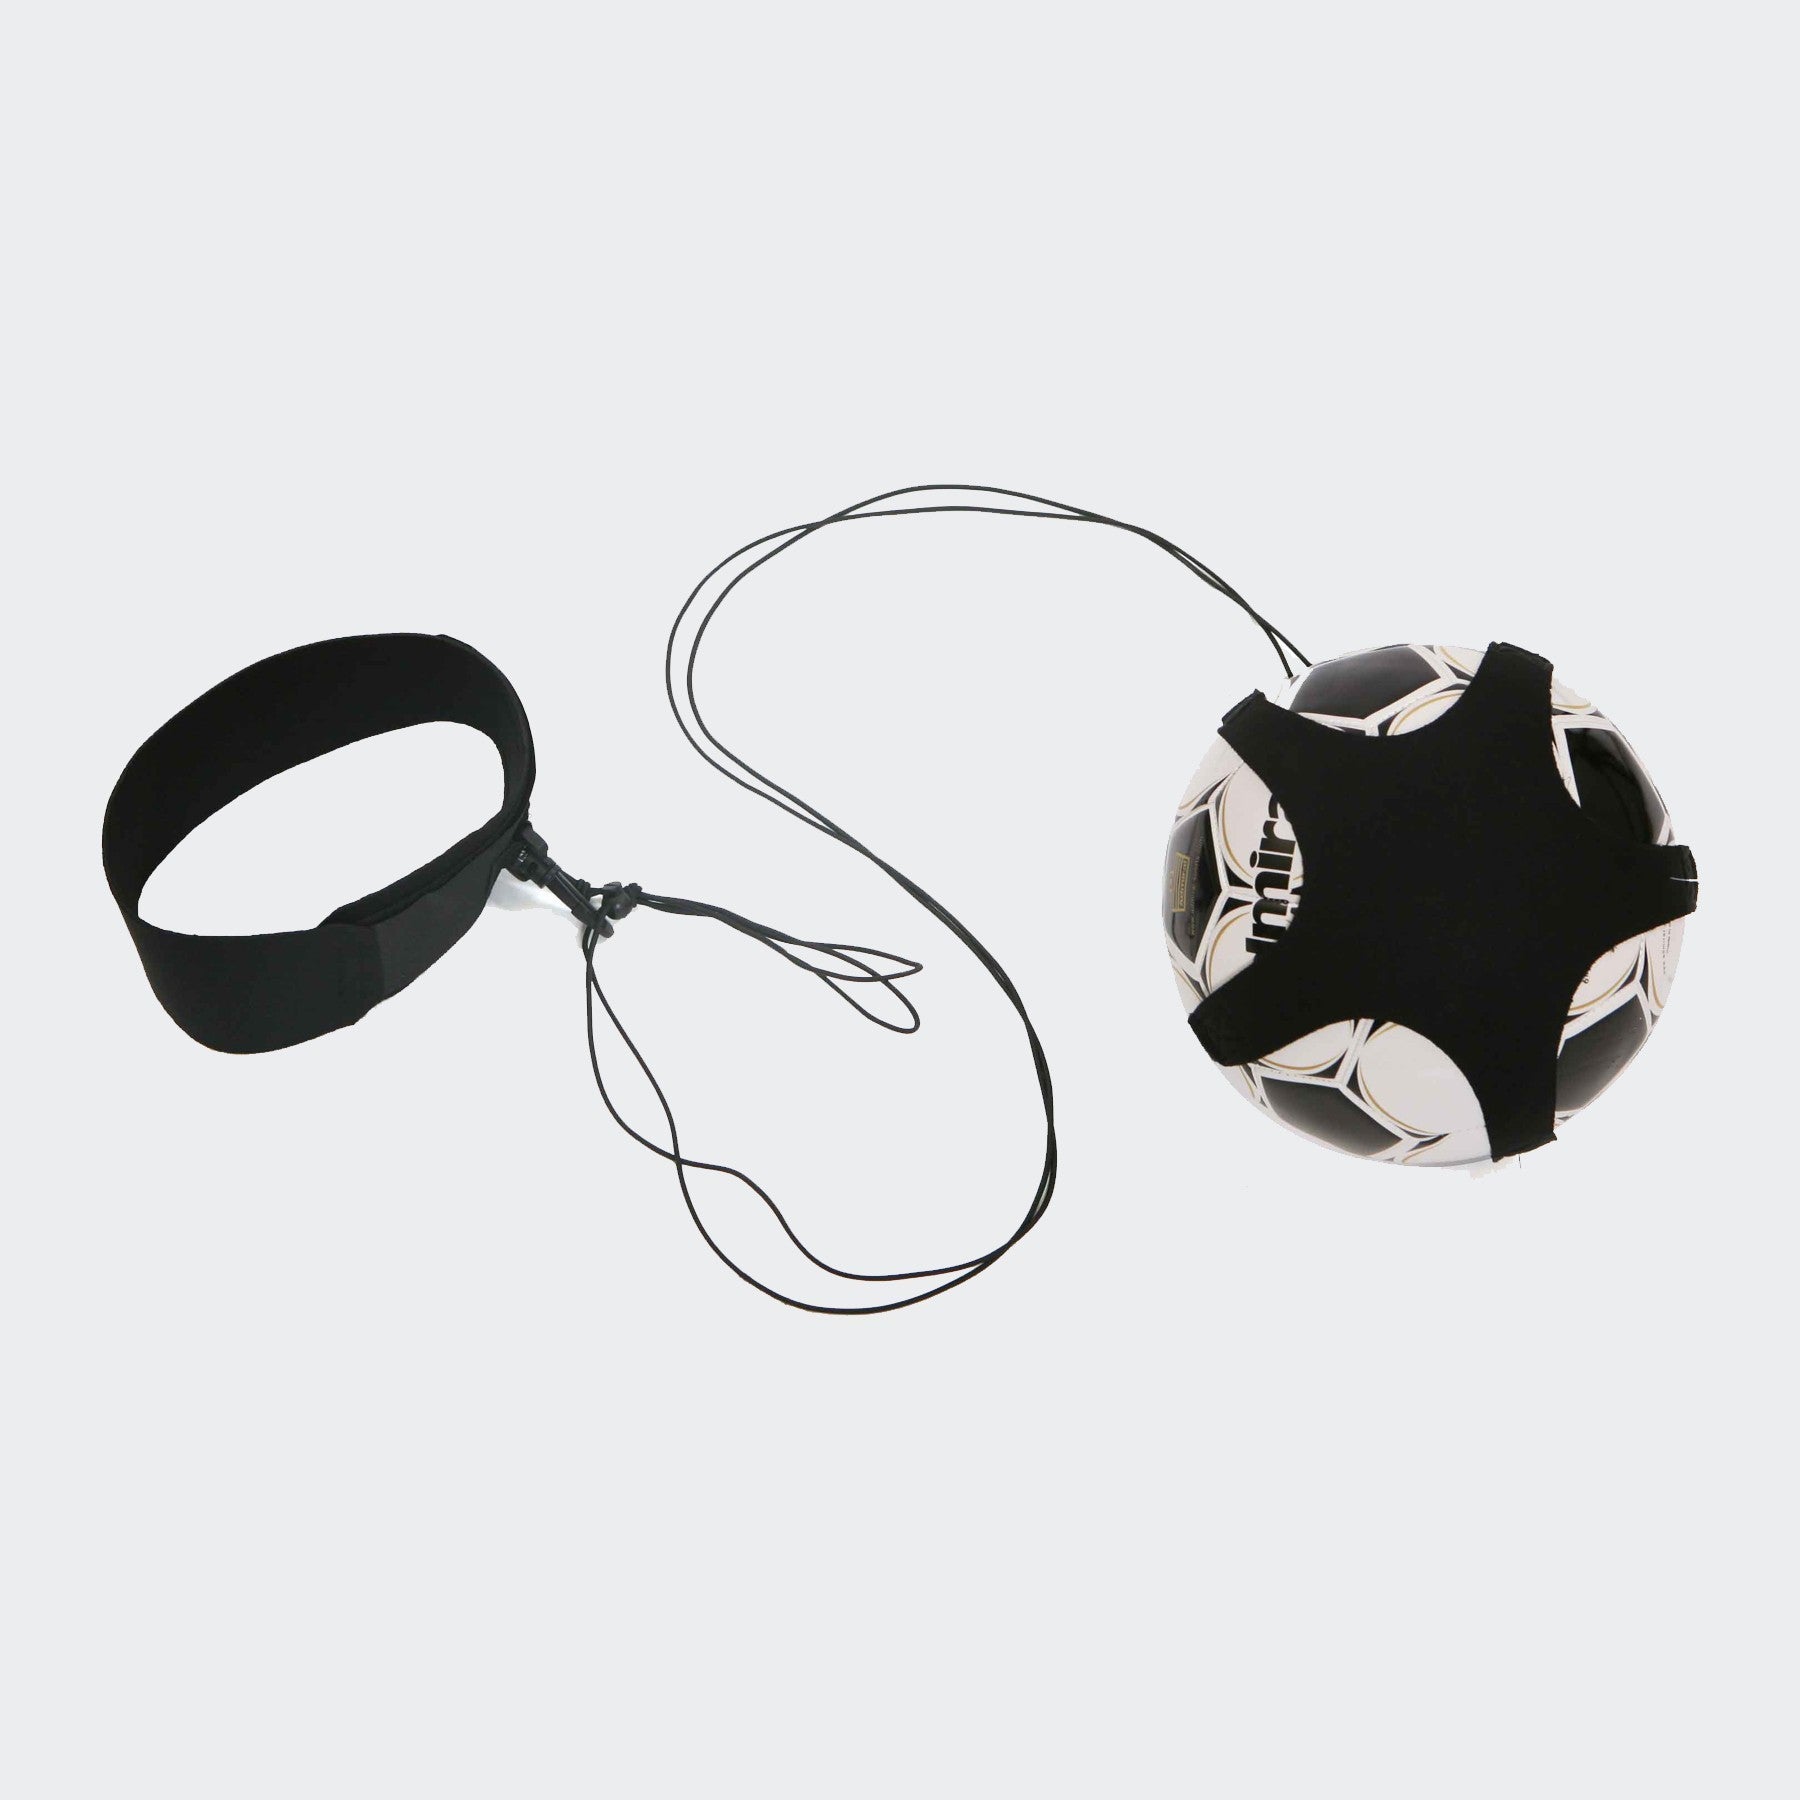 Kick Ball Touch Trainer